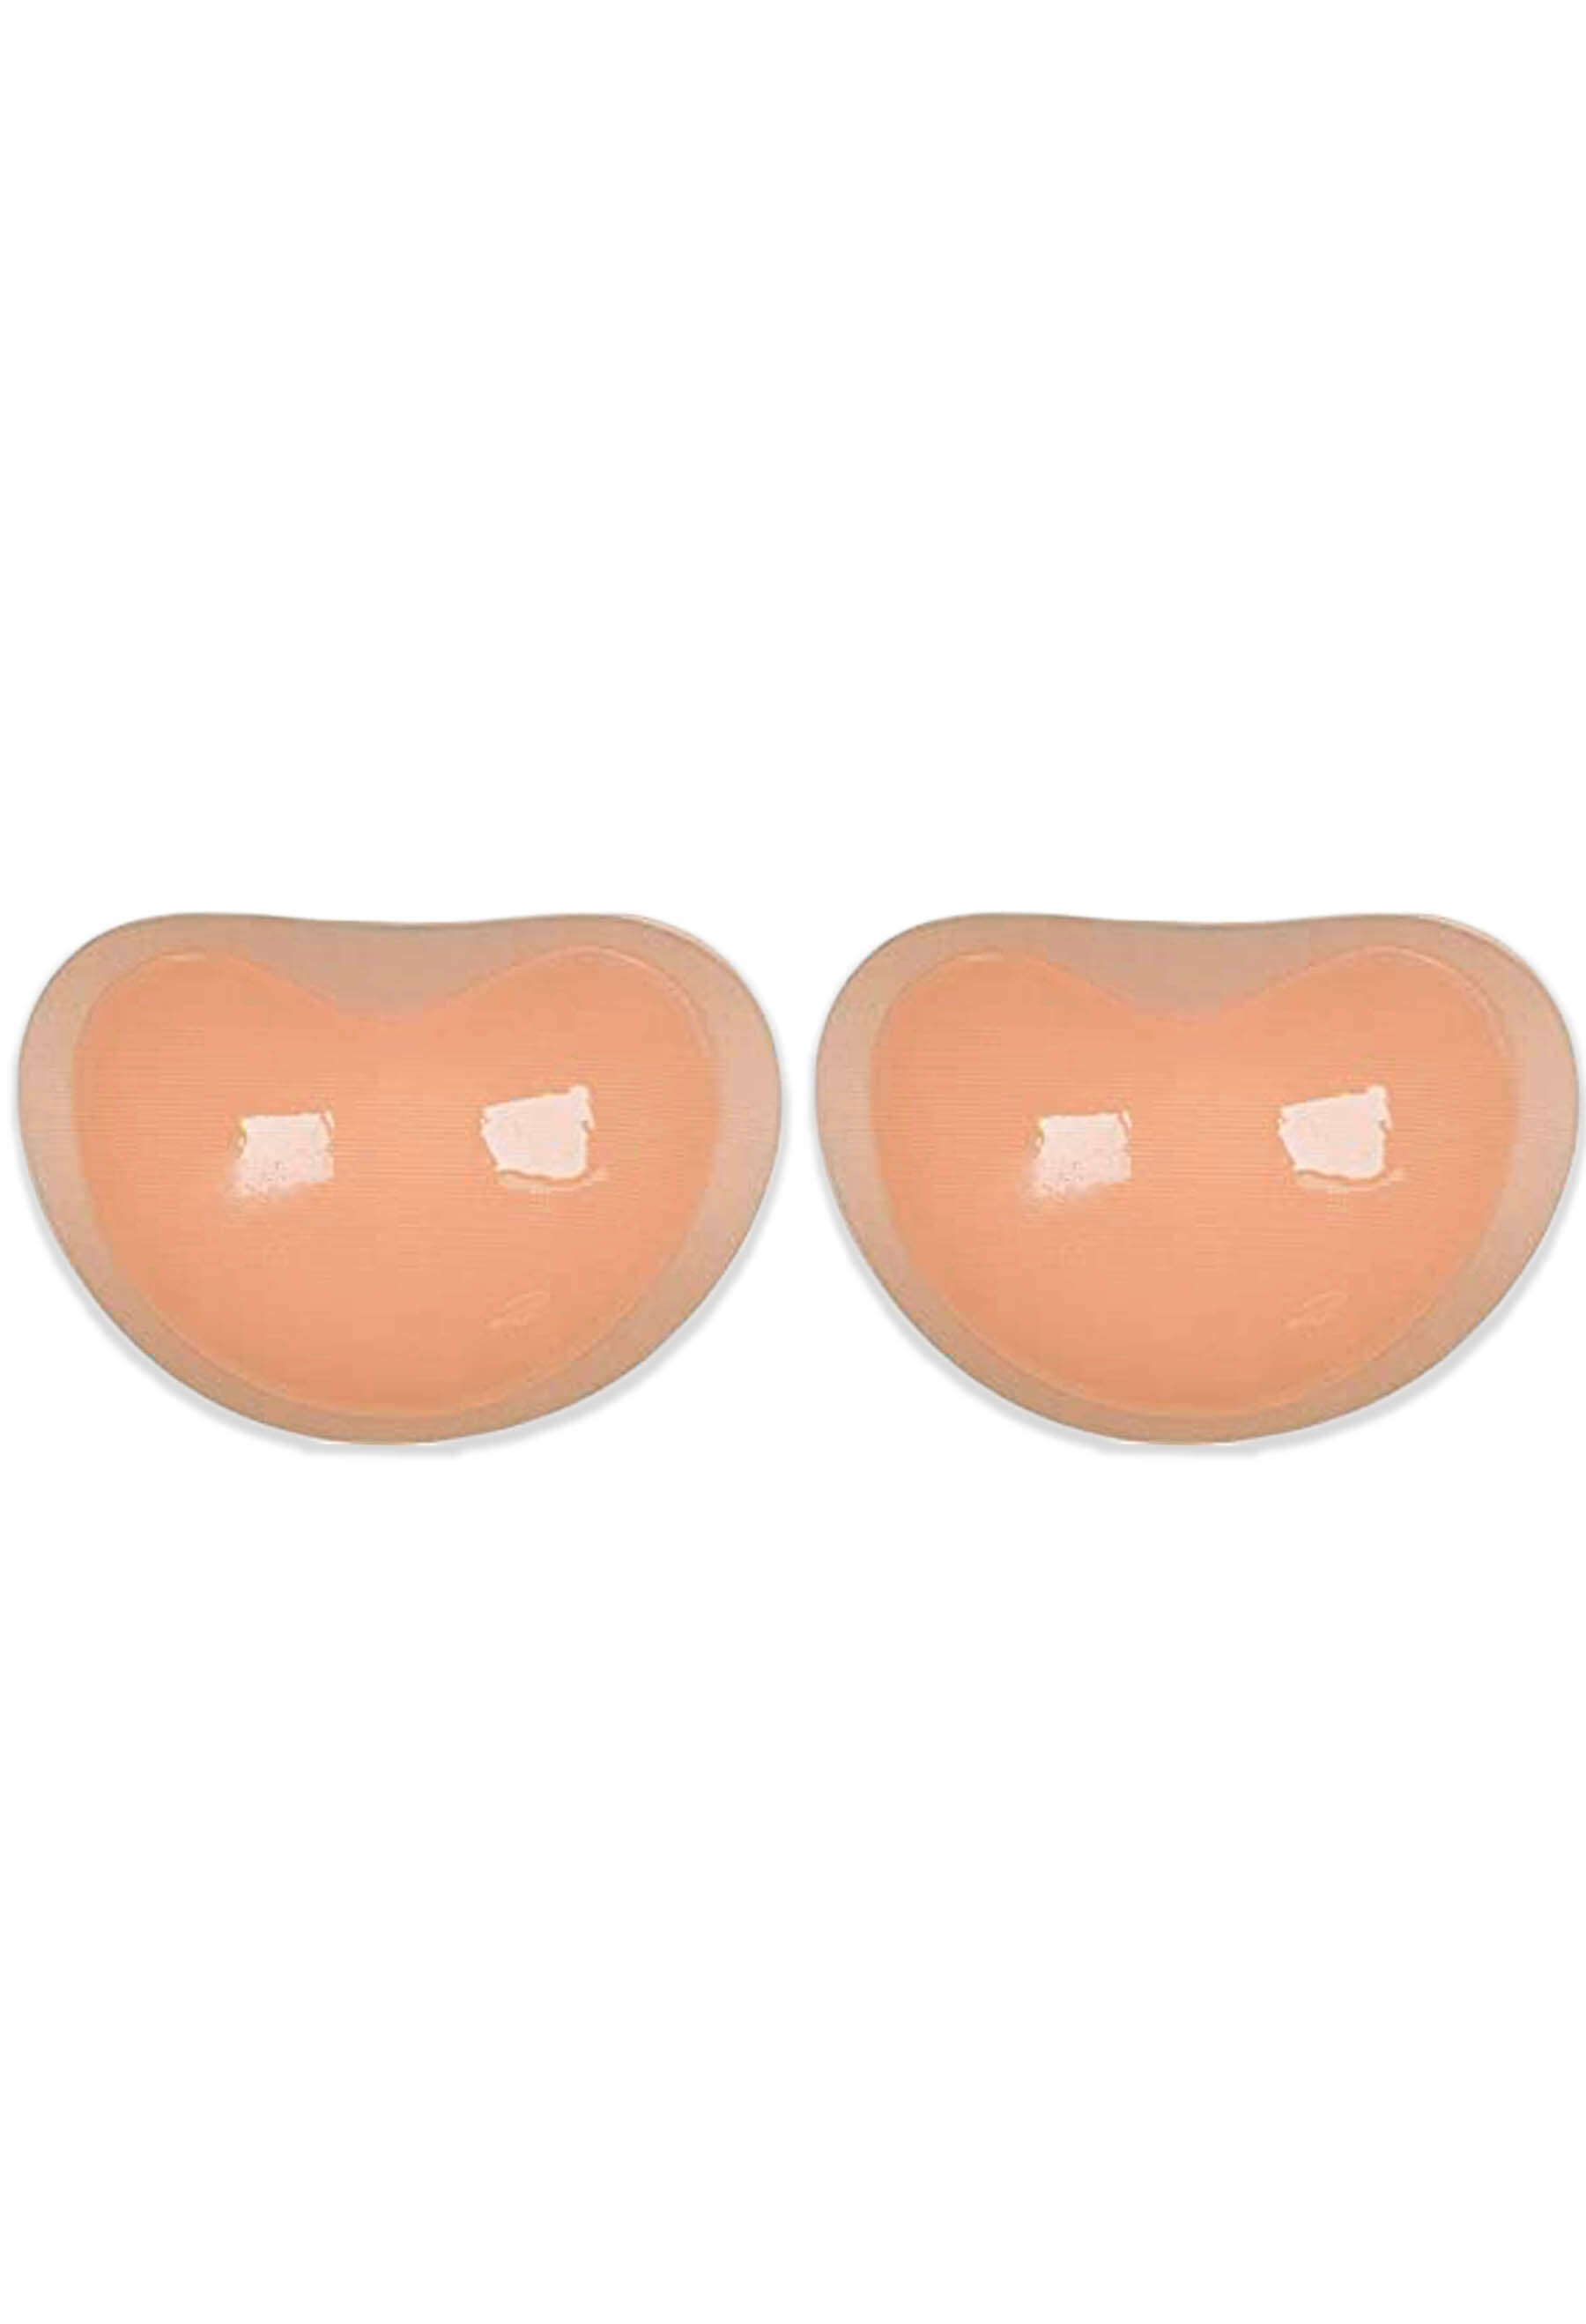 Silicone Bra Insert Breast Forms Pad Enhancer Cleavage Pushup 1-2